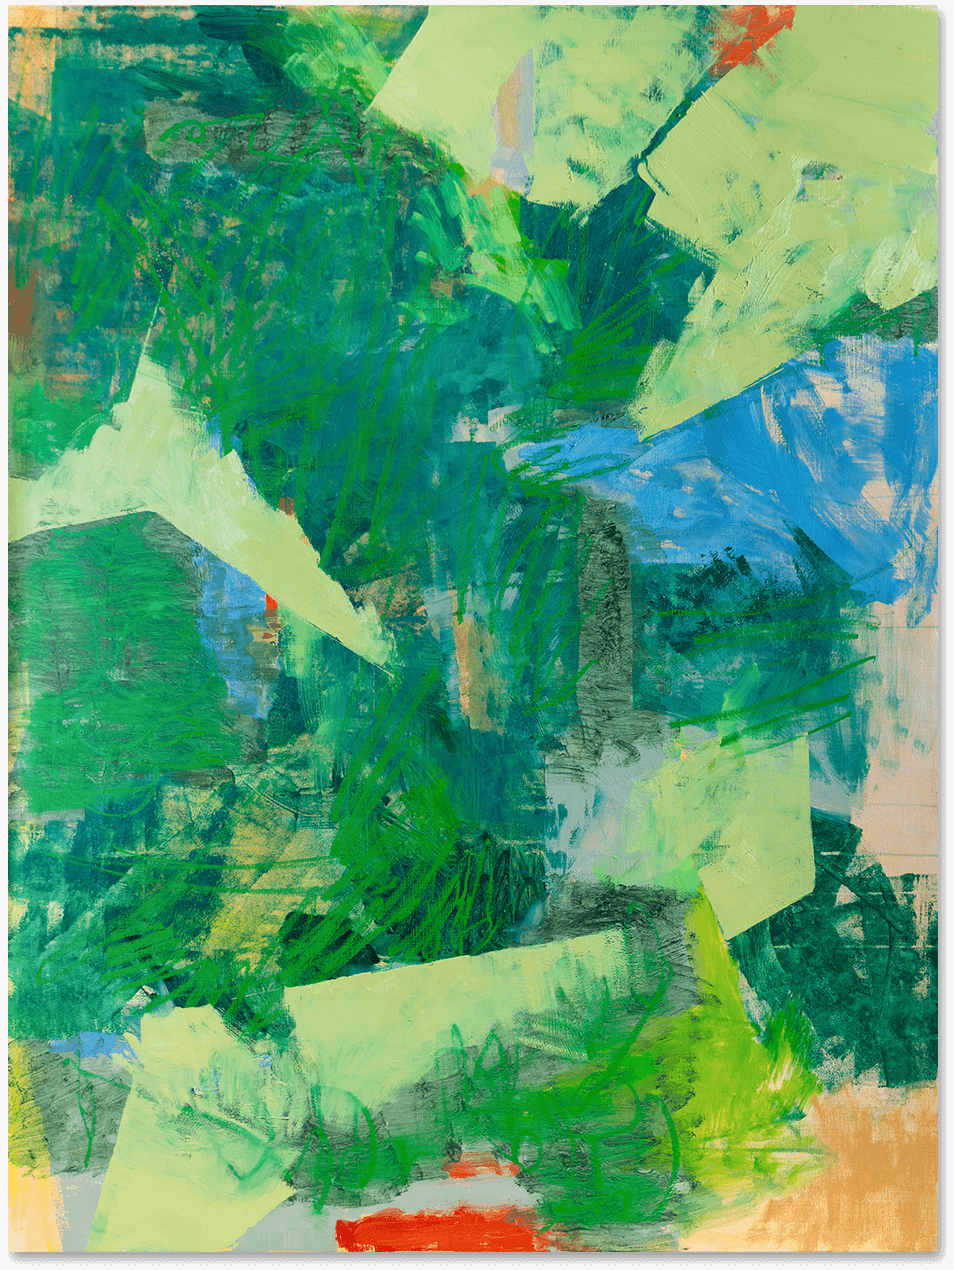 An abstract oil painting in different shades of green